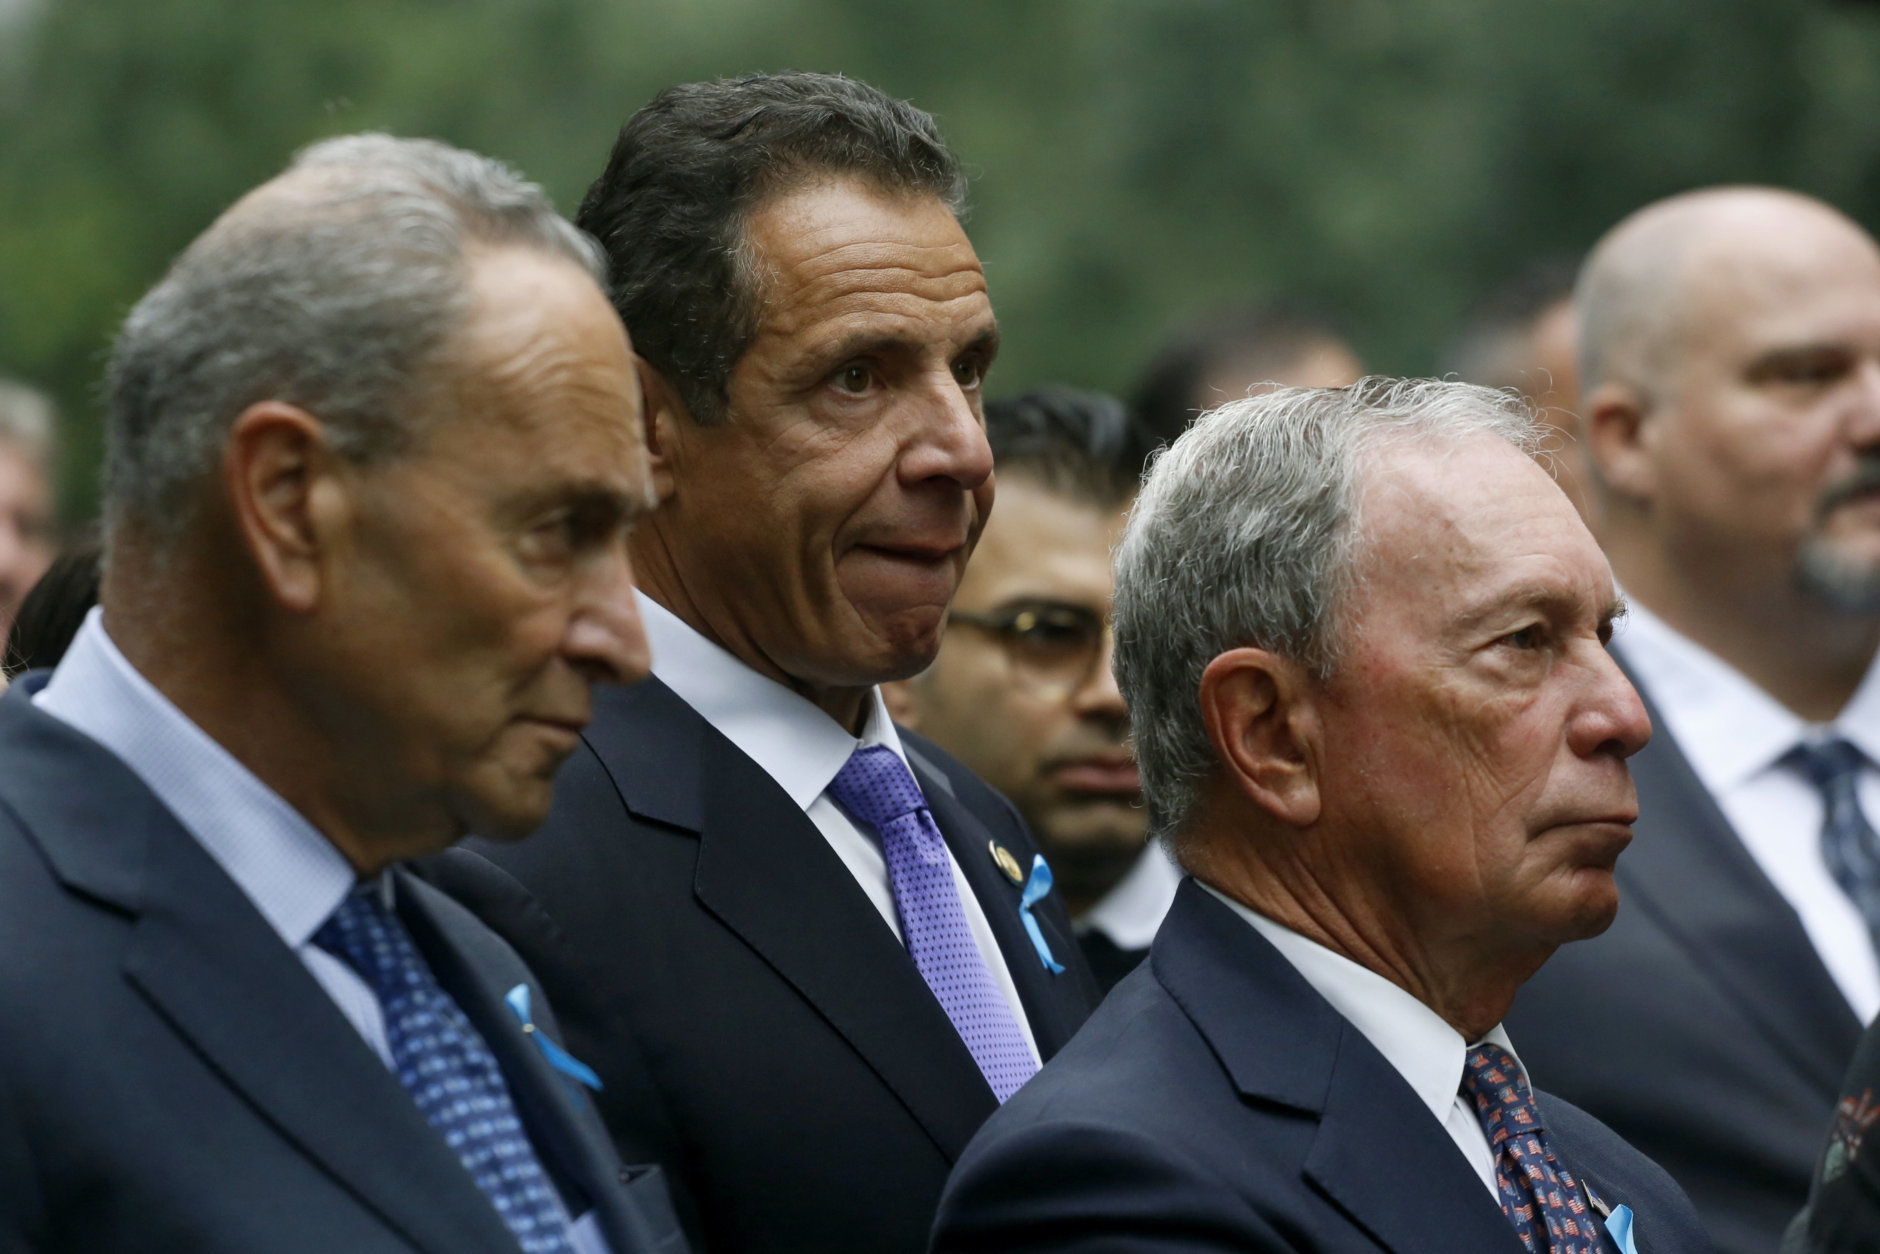 Attending a ceremony marking the 17th anniversary of the terrorist attacks on the United States are, left to right: U.S. Senator Chuck Schumer, D-NY, New York Gov. Andrew Cuomo, and former New York Mayor Michael Bloomberg, Tuesday, Sept. 11, 2018, in New York. (AP Photo/Mark Lennihan)